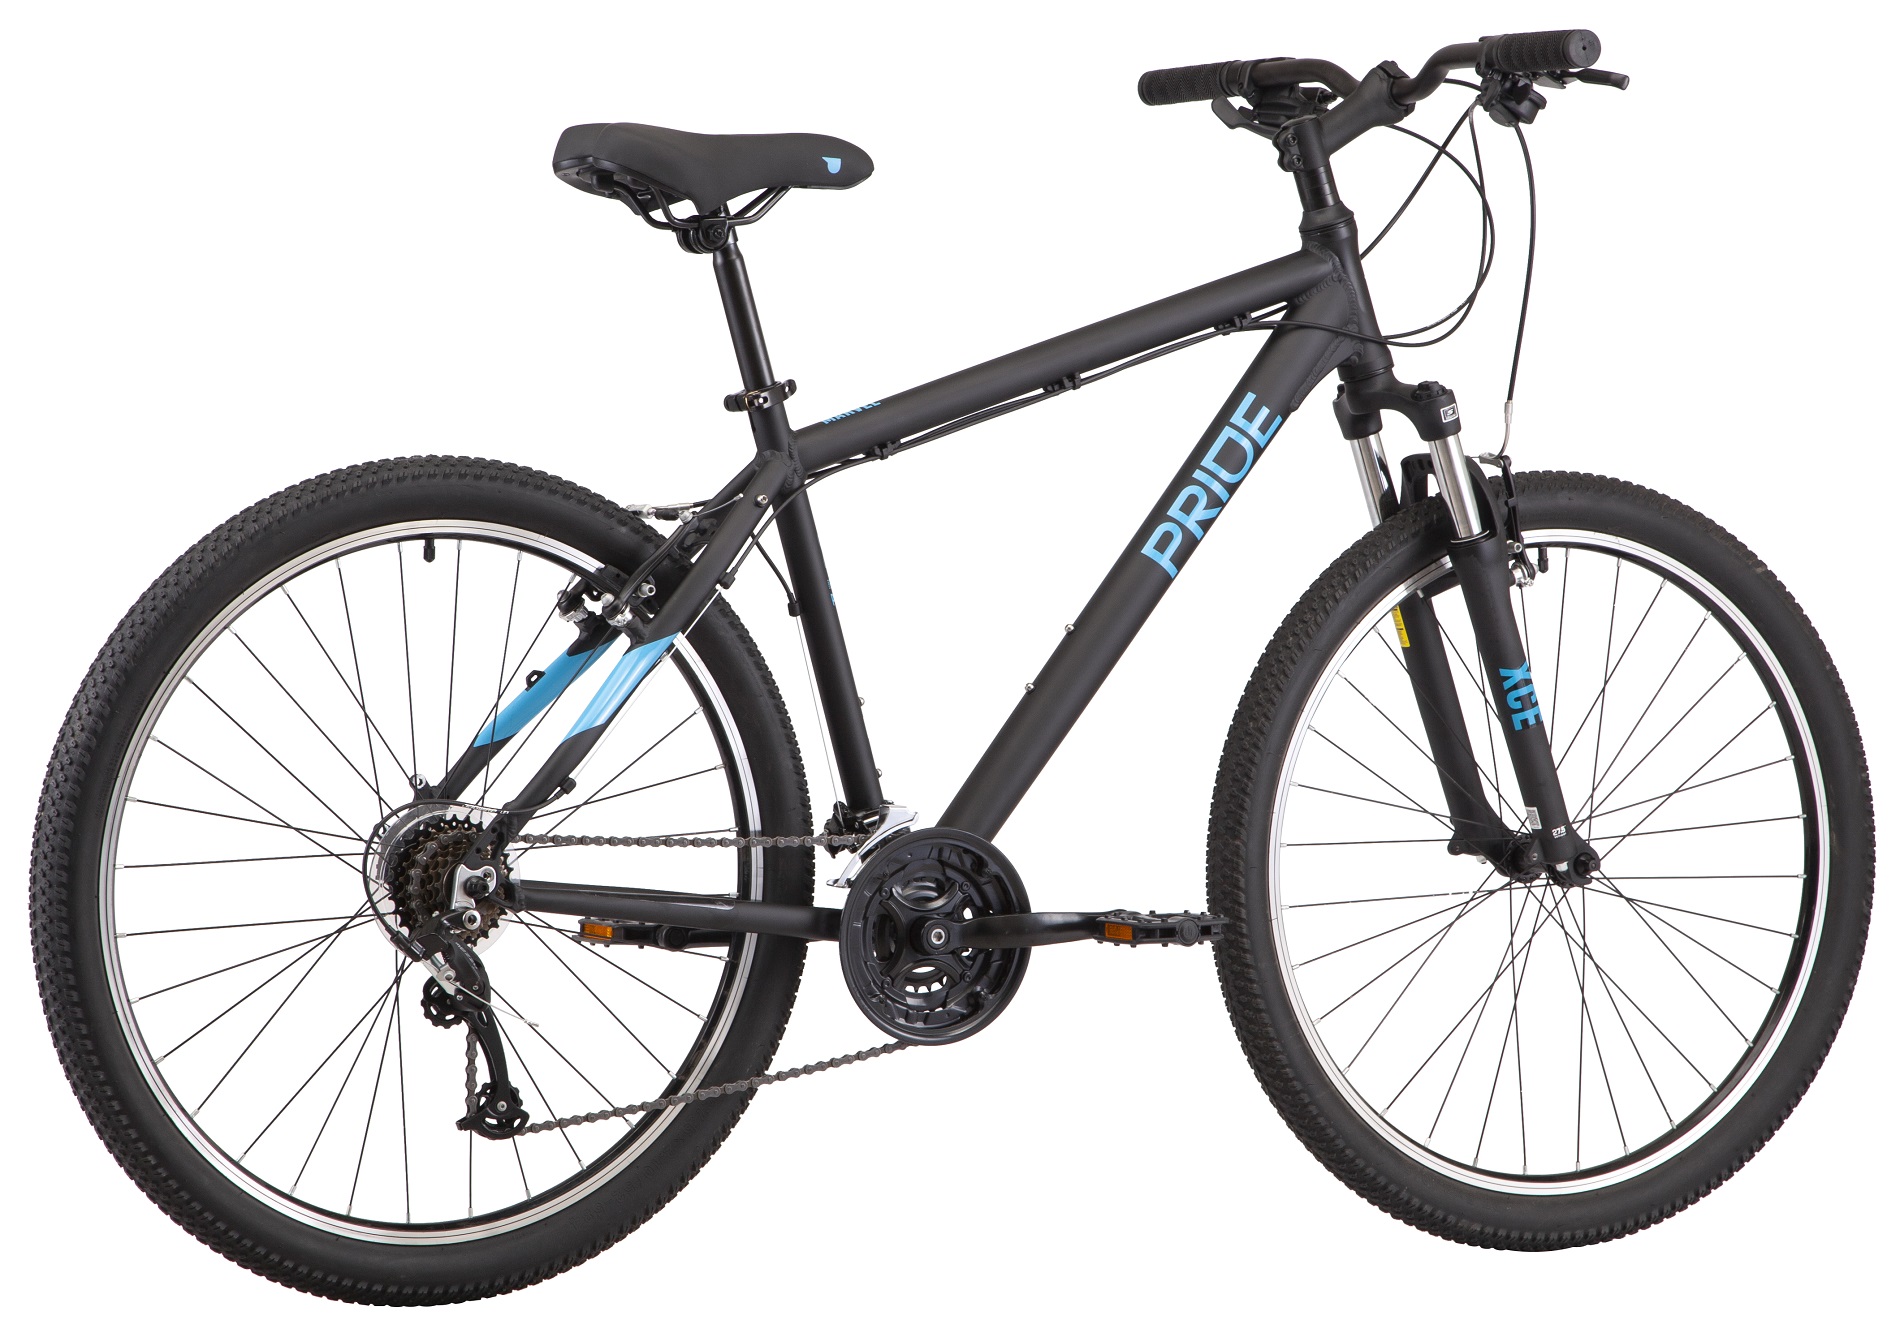 27.5" PRIDE MARVEL 7.1 frame - M 2022 Black (rear and front switches and tamnet - Microshift) Photo 3